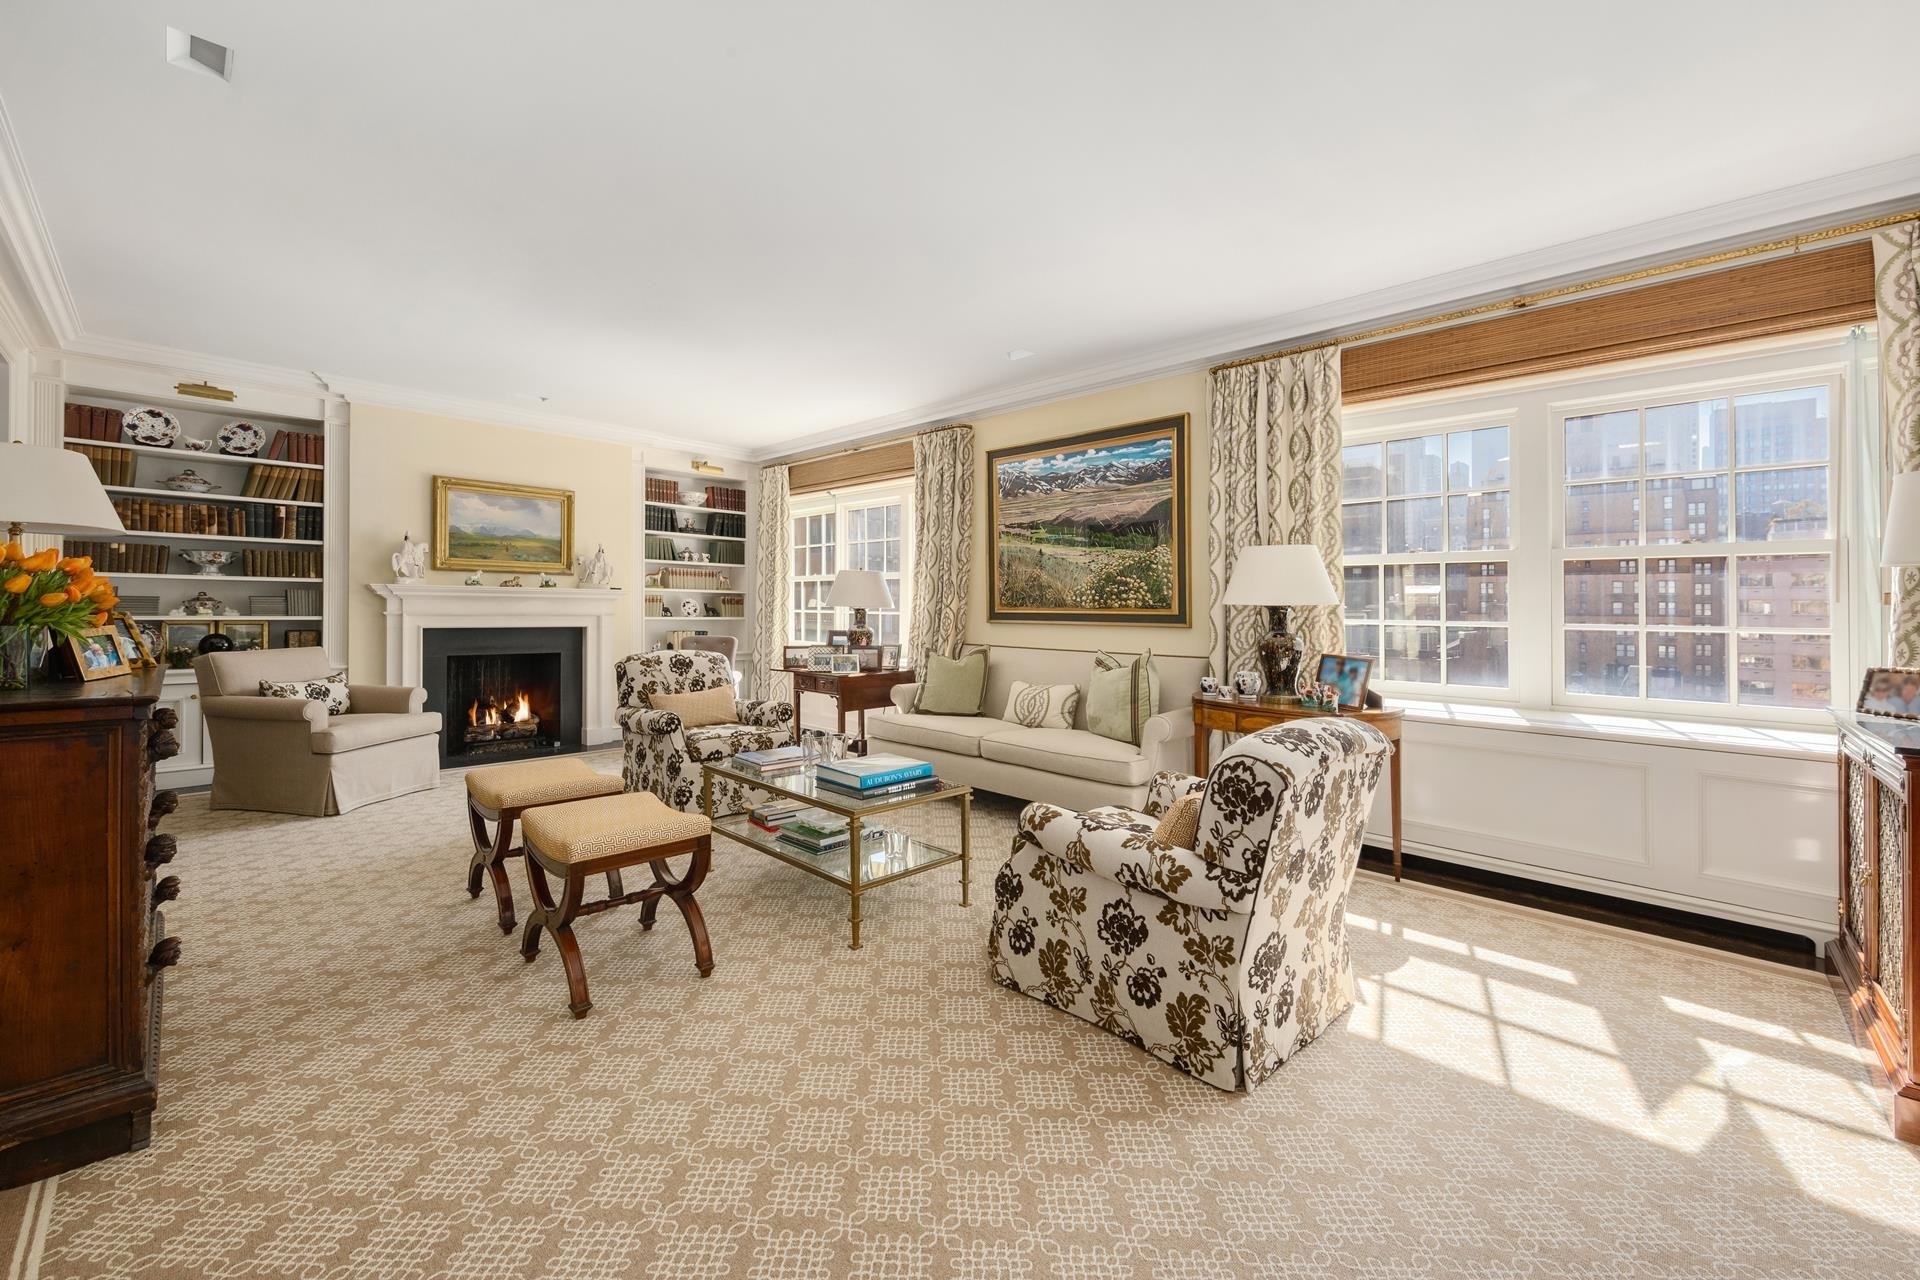 1. Co-op Properties for Sale at 53 E 66TH ST, PHB Lenox Hill, New York, New York 10021